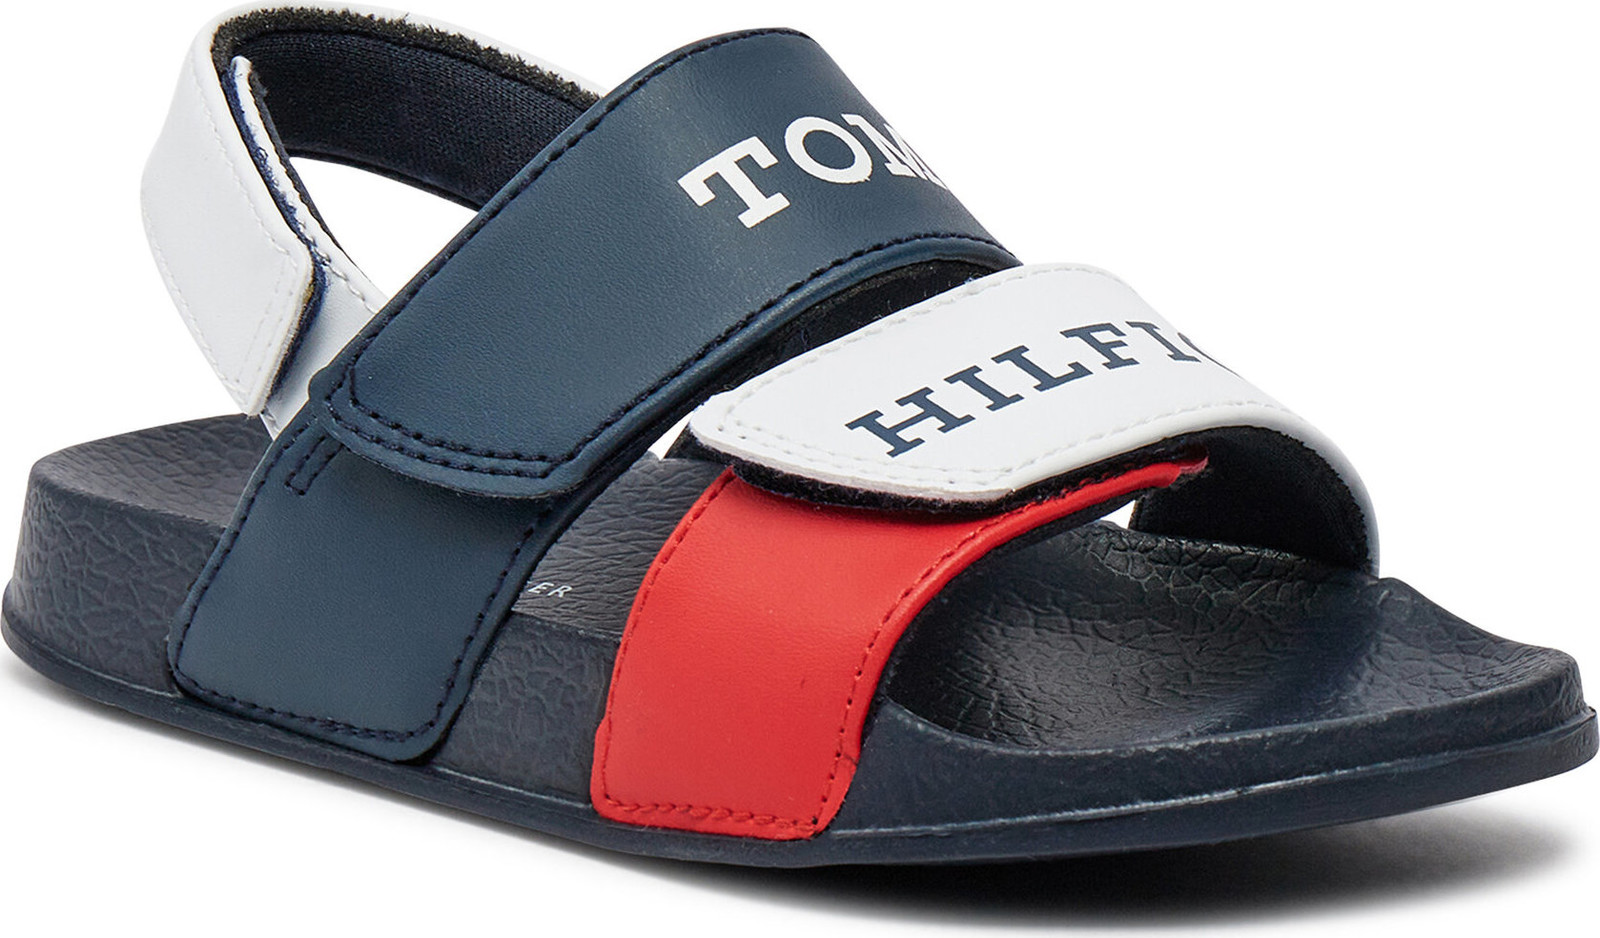 Sandály Tommy Hilfiger Velcro T1B2-33454-1172 S White/Blue/Red Y003